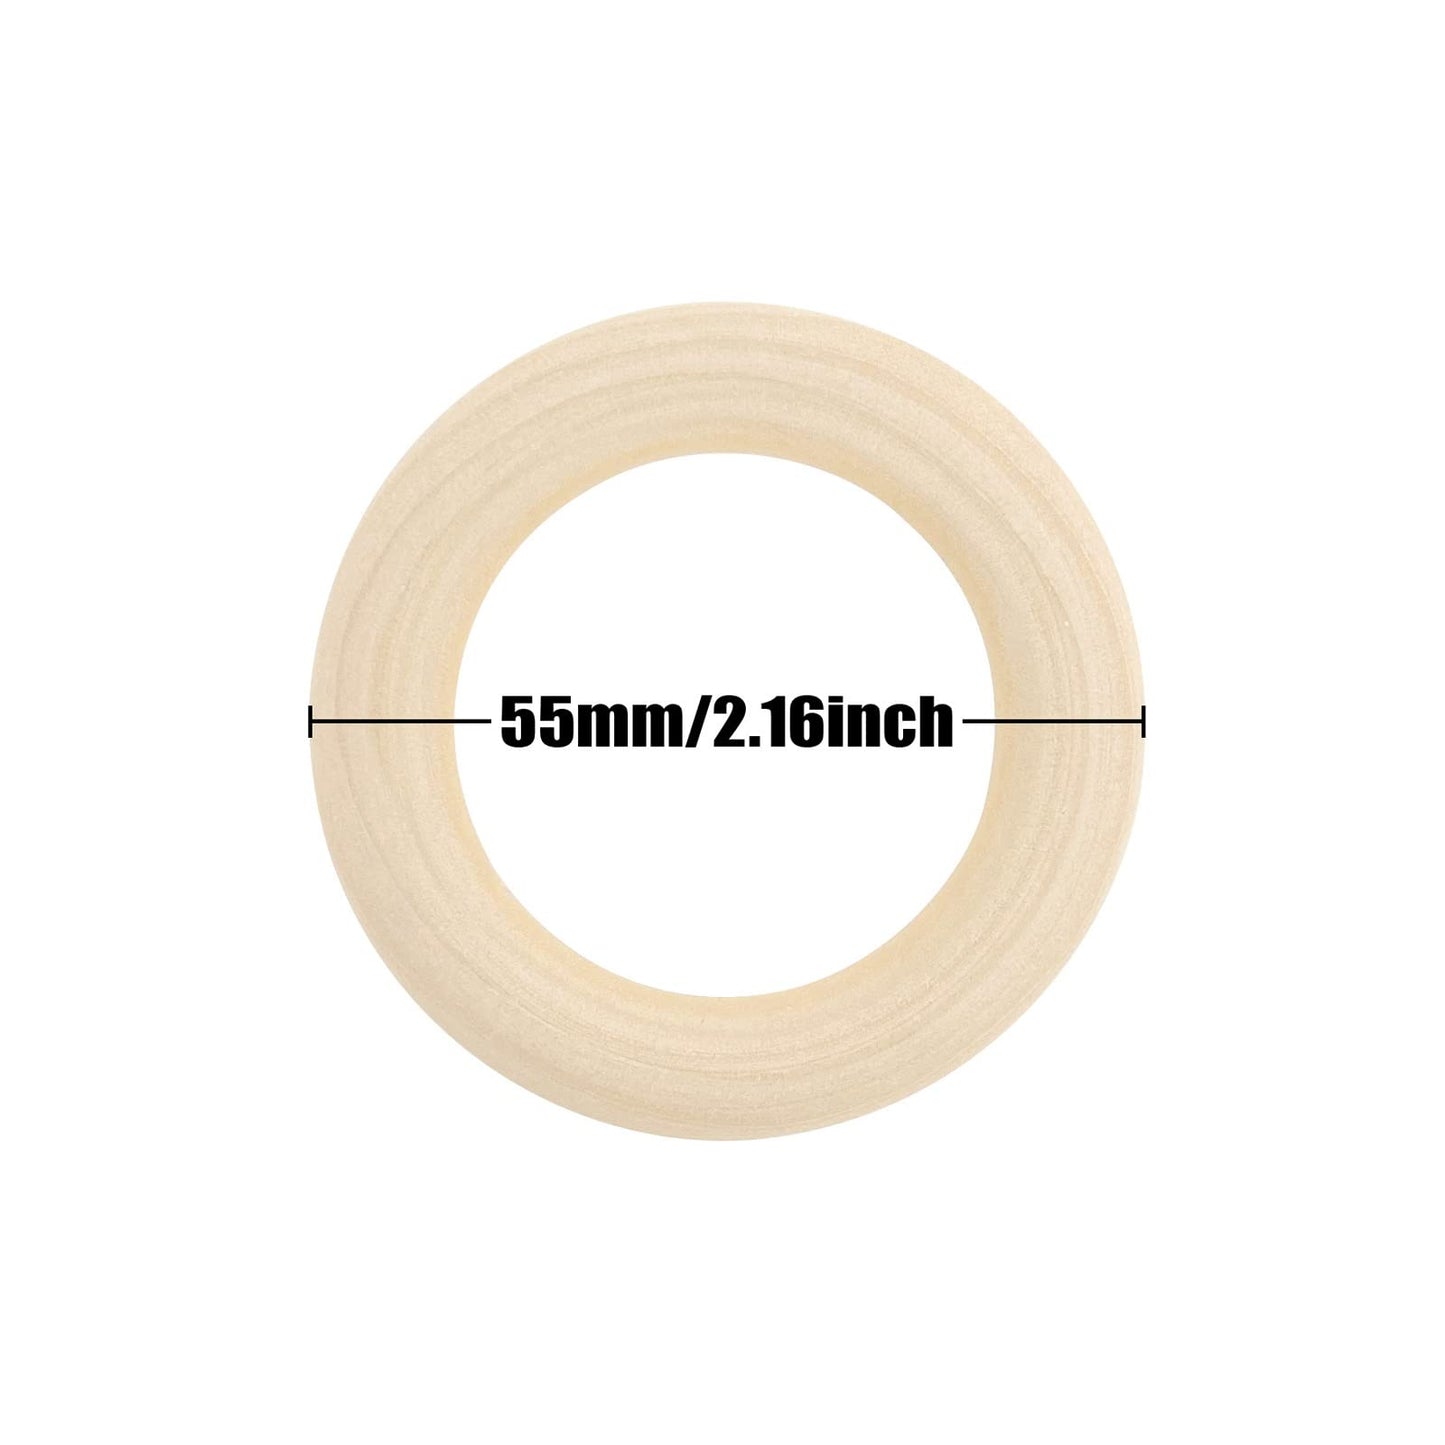 20PCS Natural Wood Rings for Crafts, Macrame Rings for DIY, Wooden Rings Without Paint, Pendant Connectors 55mm/2.2inch